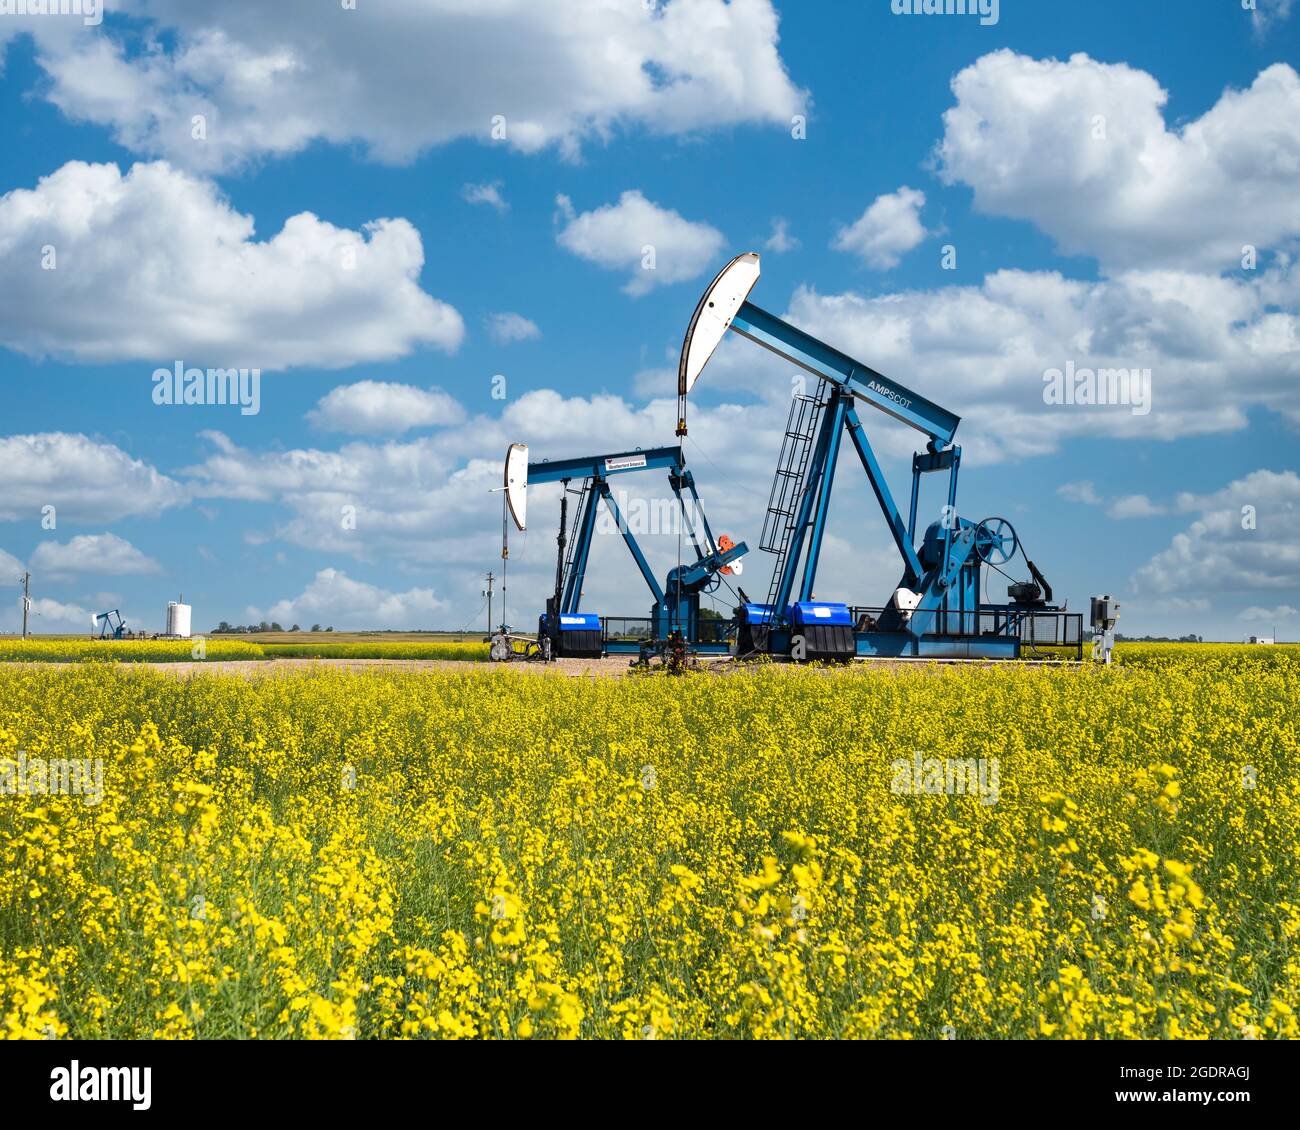 Oil pumpers in a field of yellow canola near Waskeda, Manitoba, Canada. Stock Photo